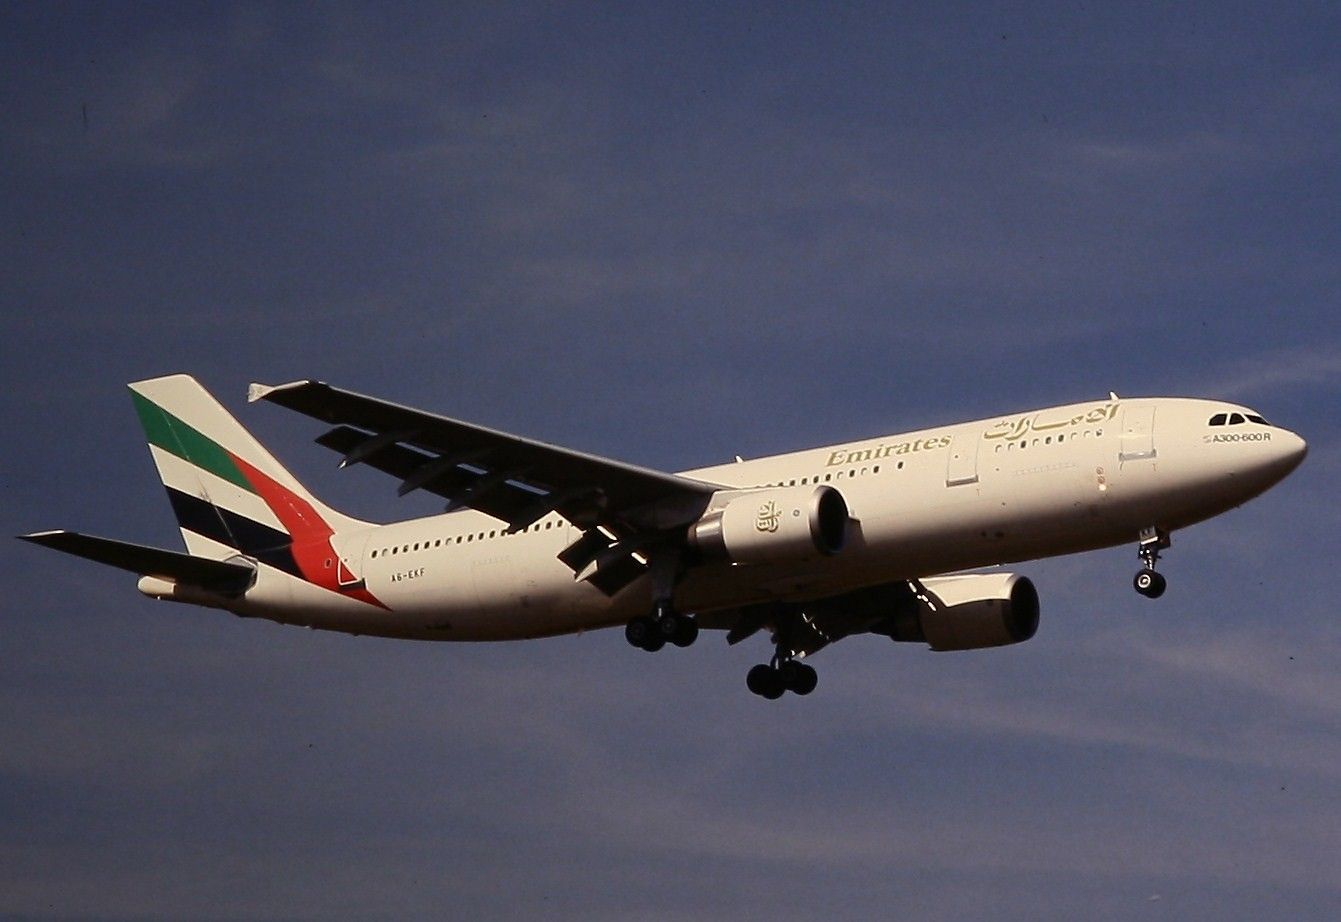 An Emirates Airbus A300 about to land.